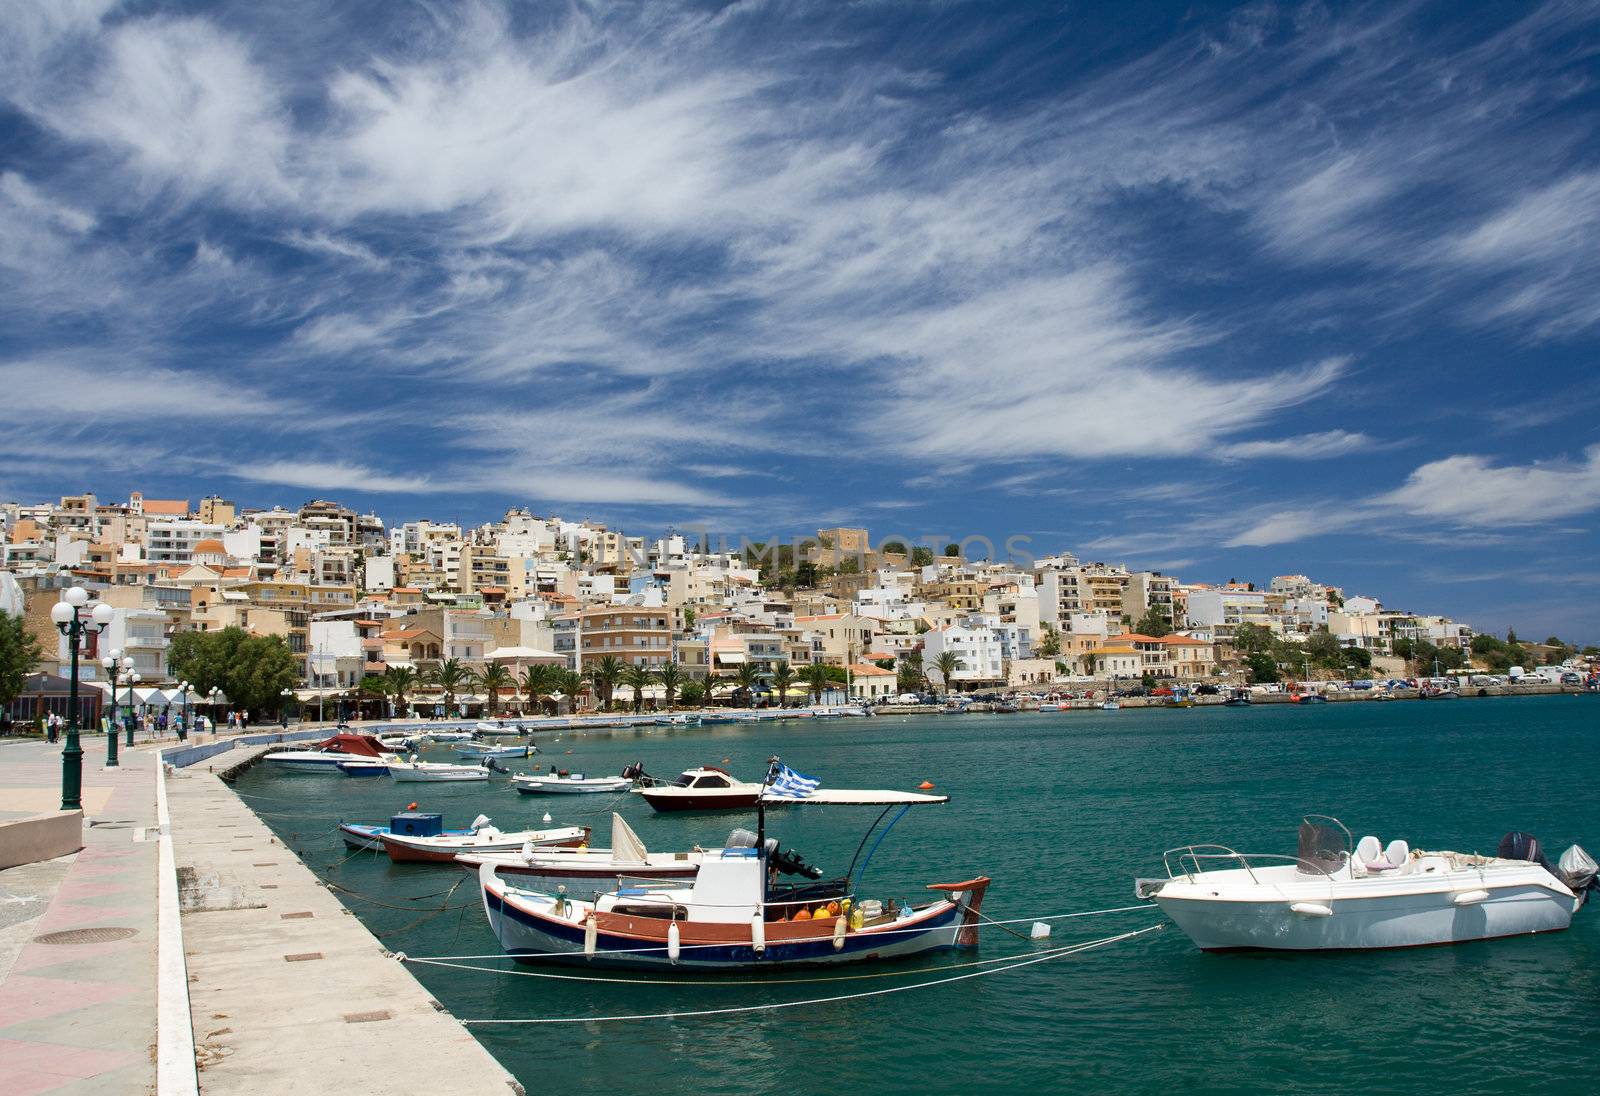 Sea bay with moored boats, promenade in Mediterranean town Sitia Greece Crete and dramatic cirrus clouds in the blue sky